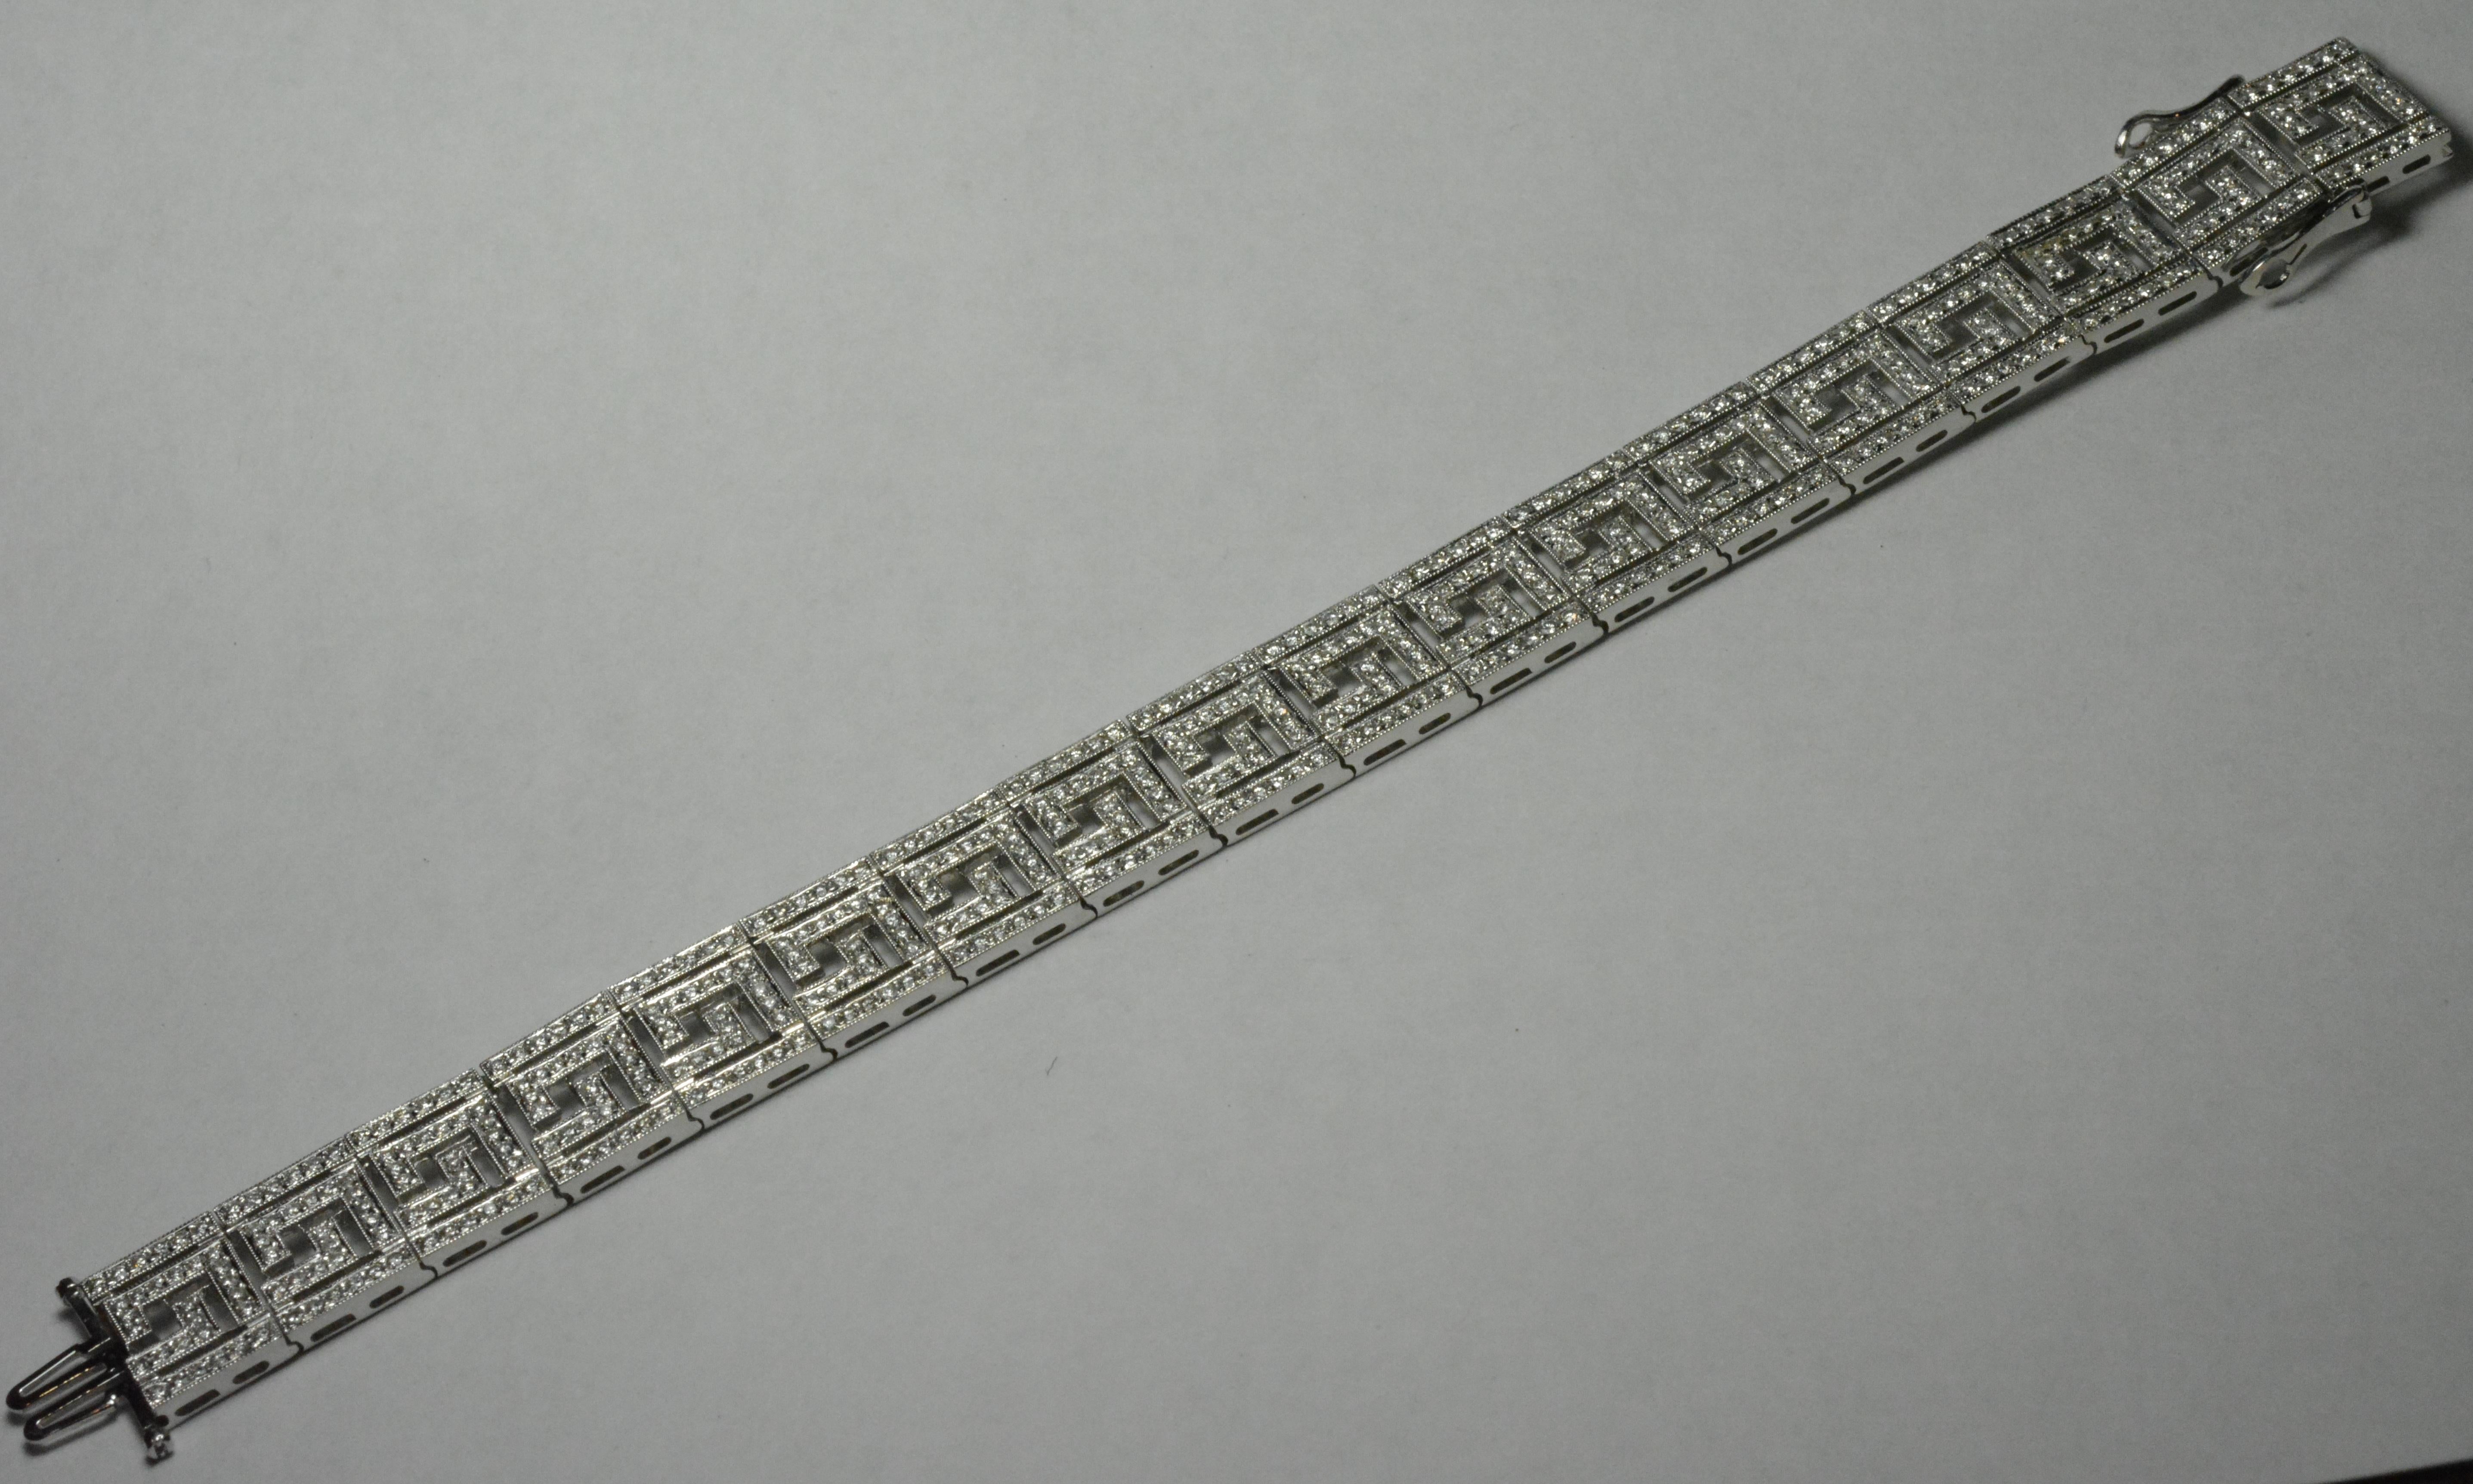 Ladies diamond bracelet in 18 karat white gold.
Stamped 750 and weighs 27.5 grams.
There are 5.00 total carats of round brilliant cut diamonds, F to G color, VS clarity, very good cuts.
The bracelet measures 6 3/4 inches long and 13.5mm wide.
Very